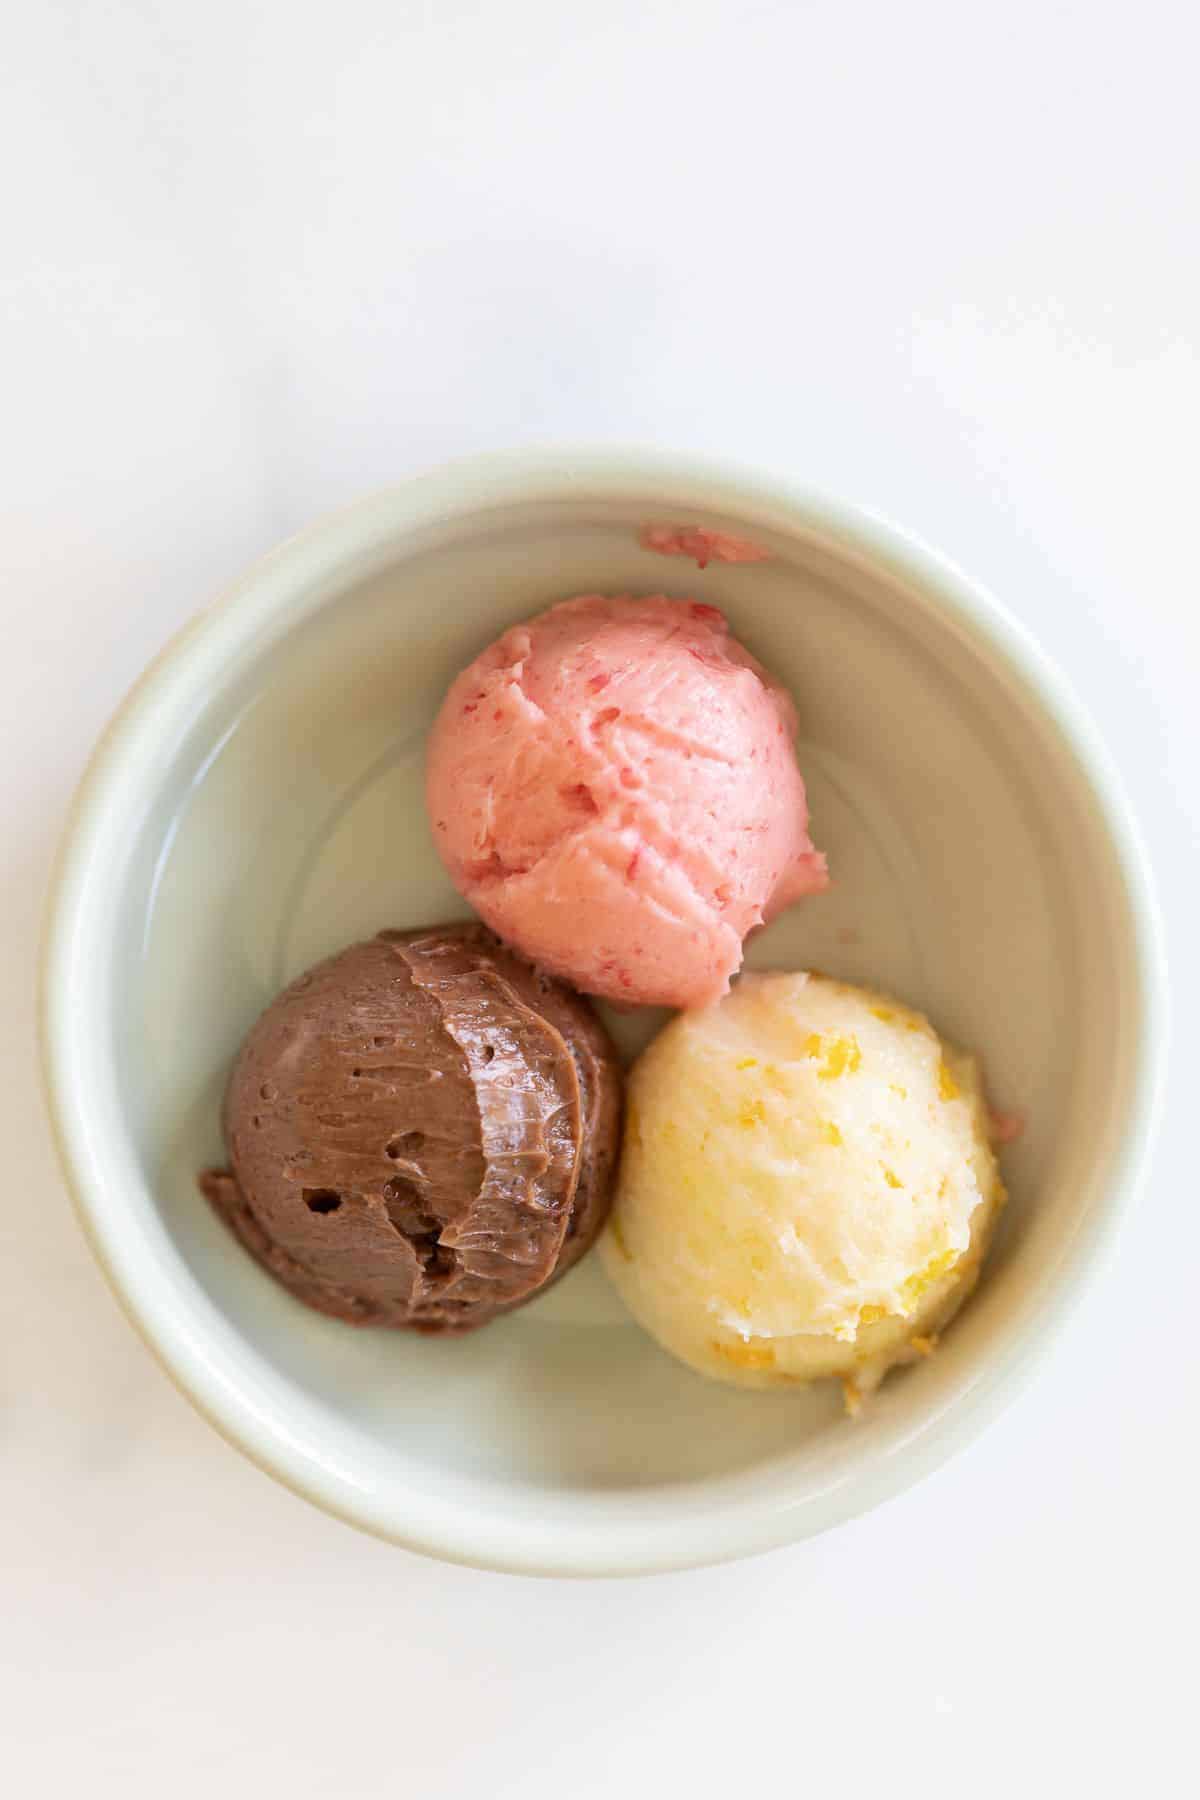 A white ramekin on a marble surface filled with three scoops of flavored butter, one chocolate, one strawberry and one orange.